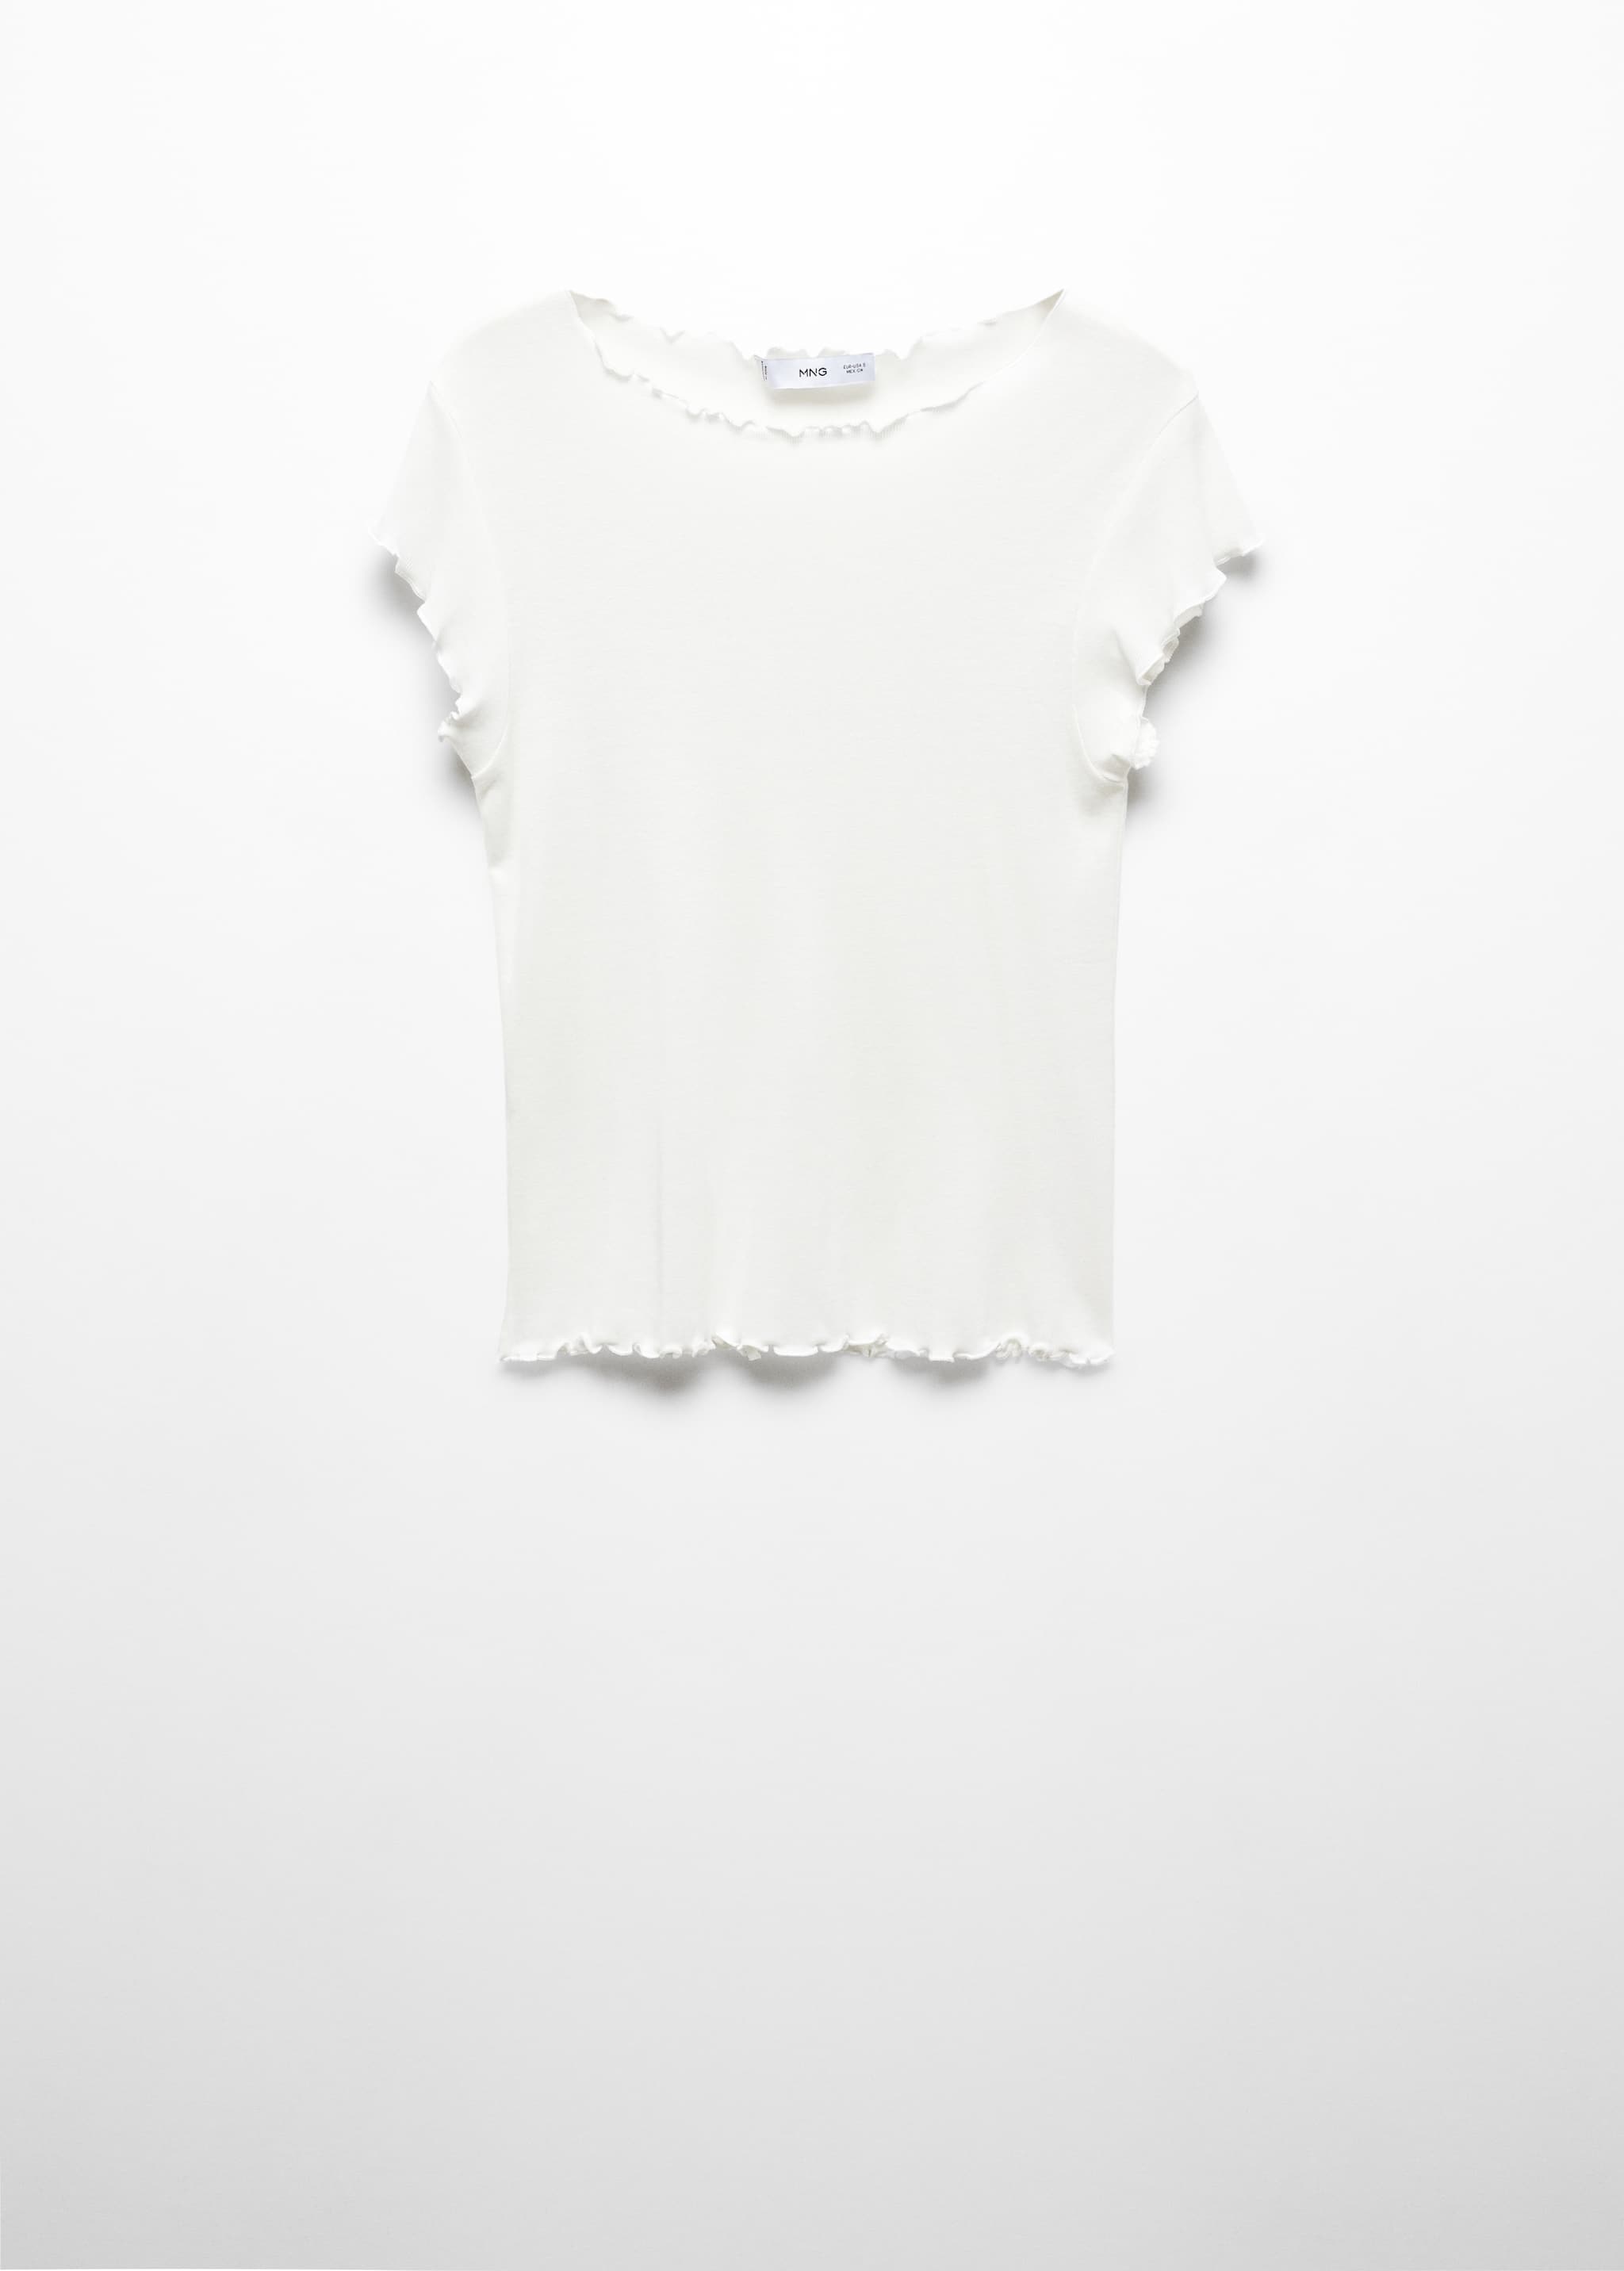 Modal t-shirt with scalloped ends - Article without model